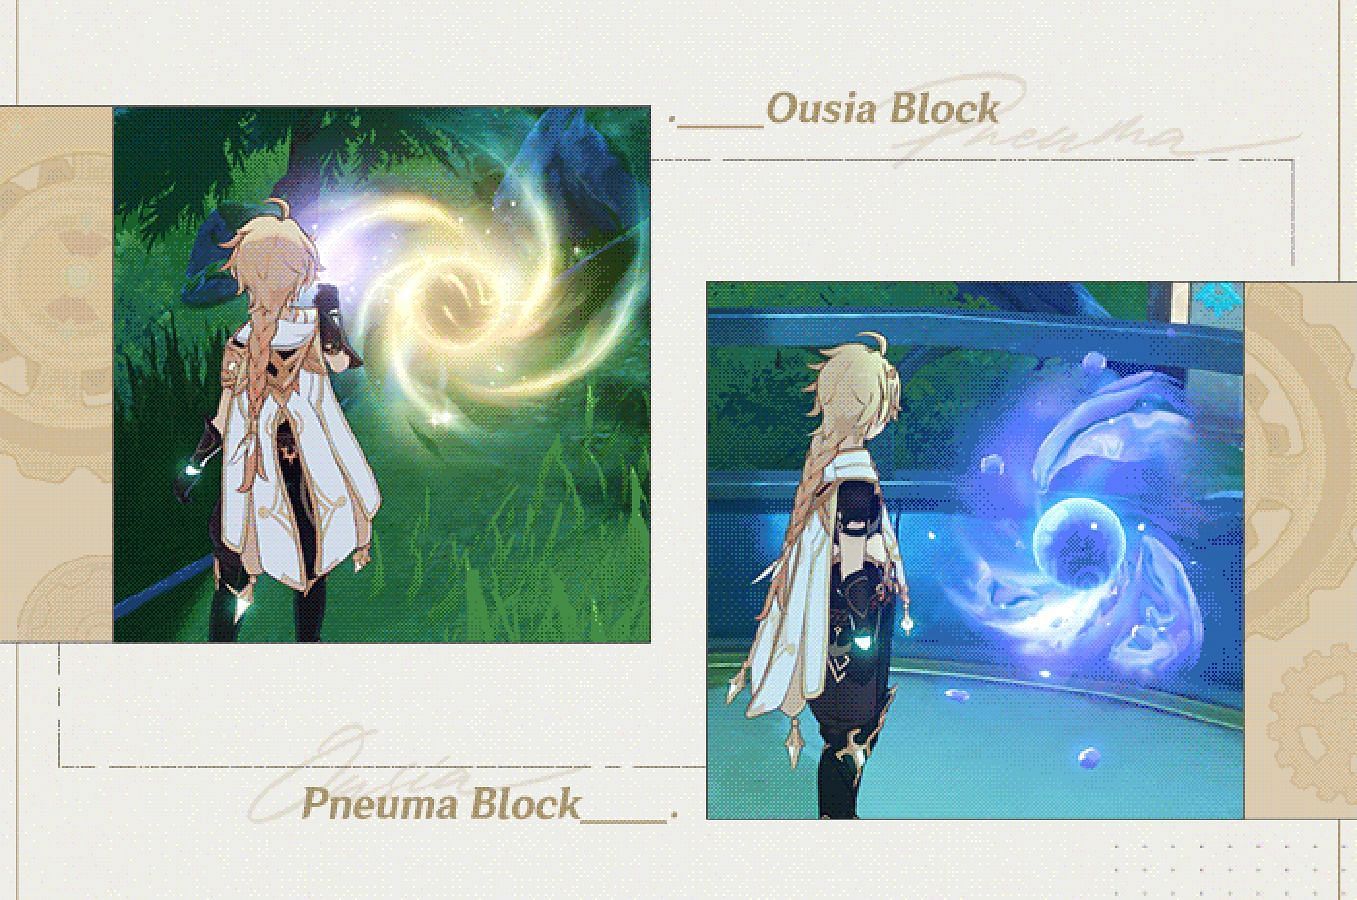 Ousia (yellow) and Pneuma (blue) energy blocks in the wilderness (Image via HoYoverse)